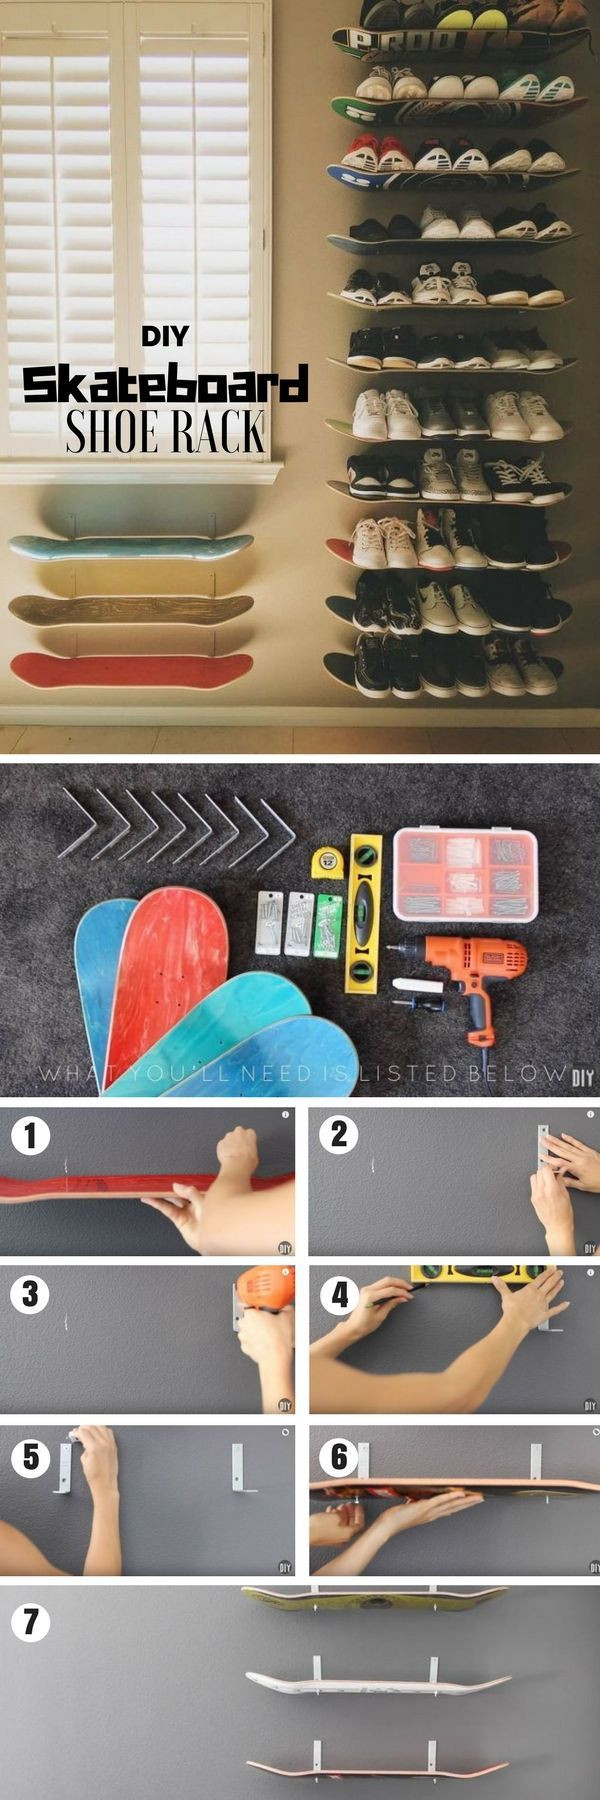 DIY Kids Shoe Rack
 Check out how to build a DIY shoe rack from old